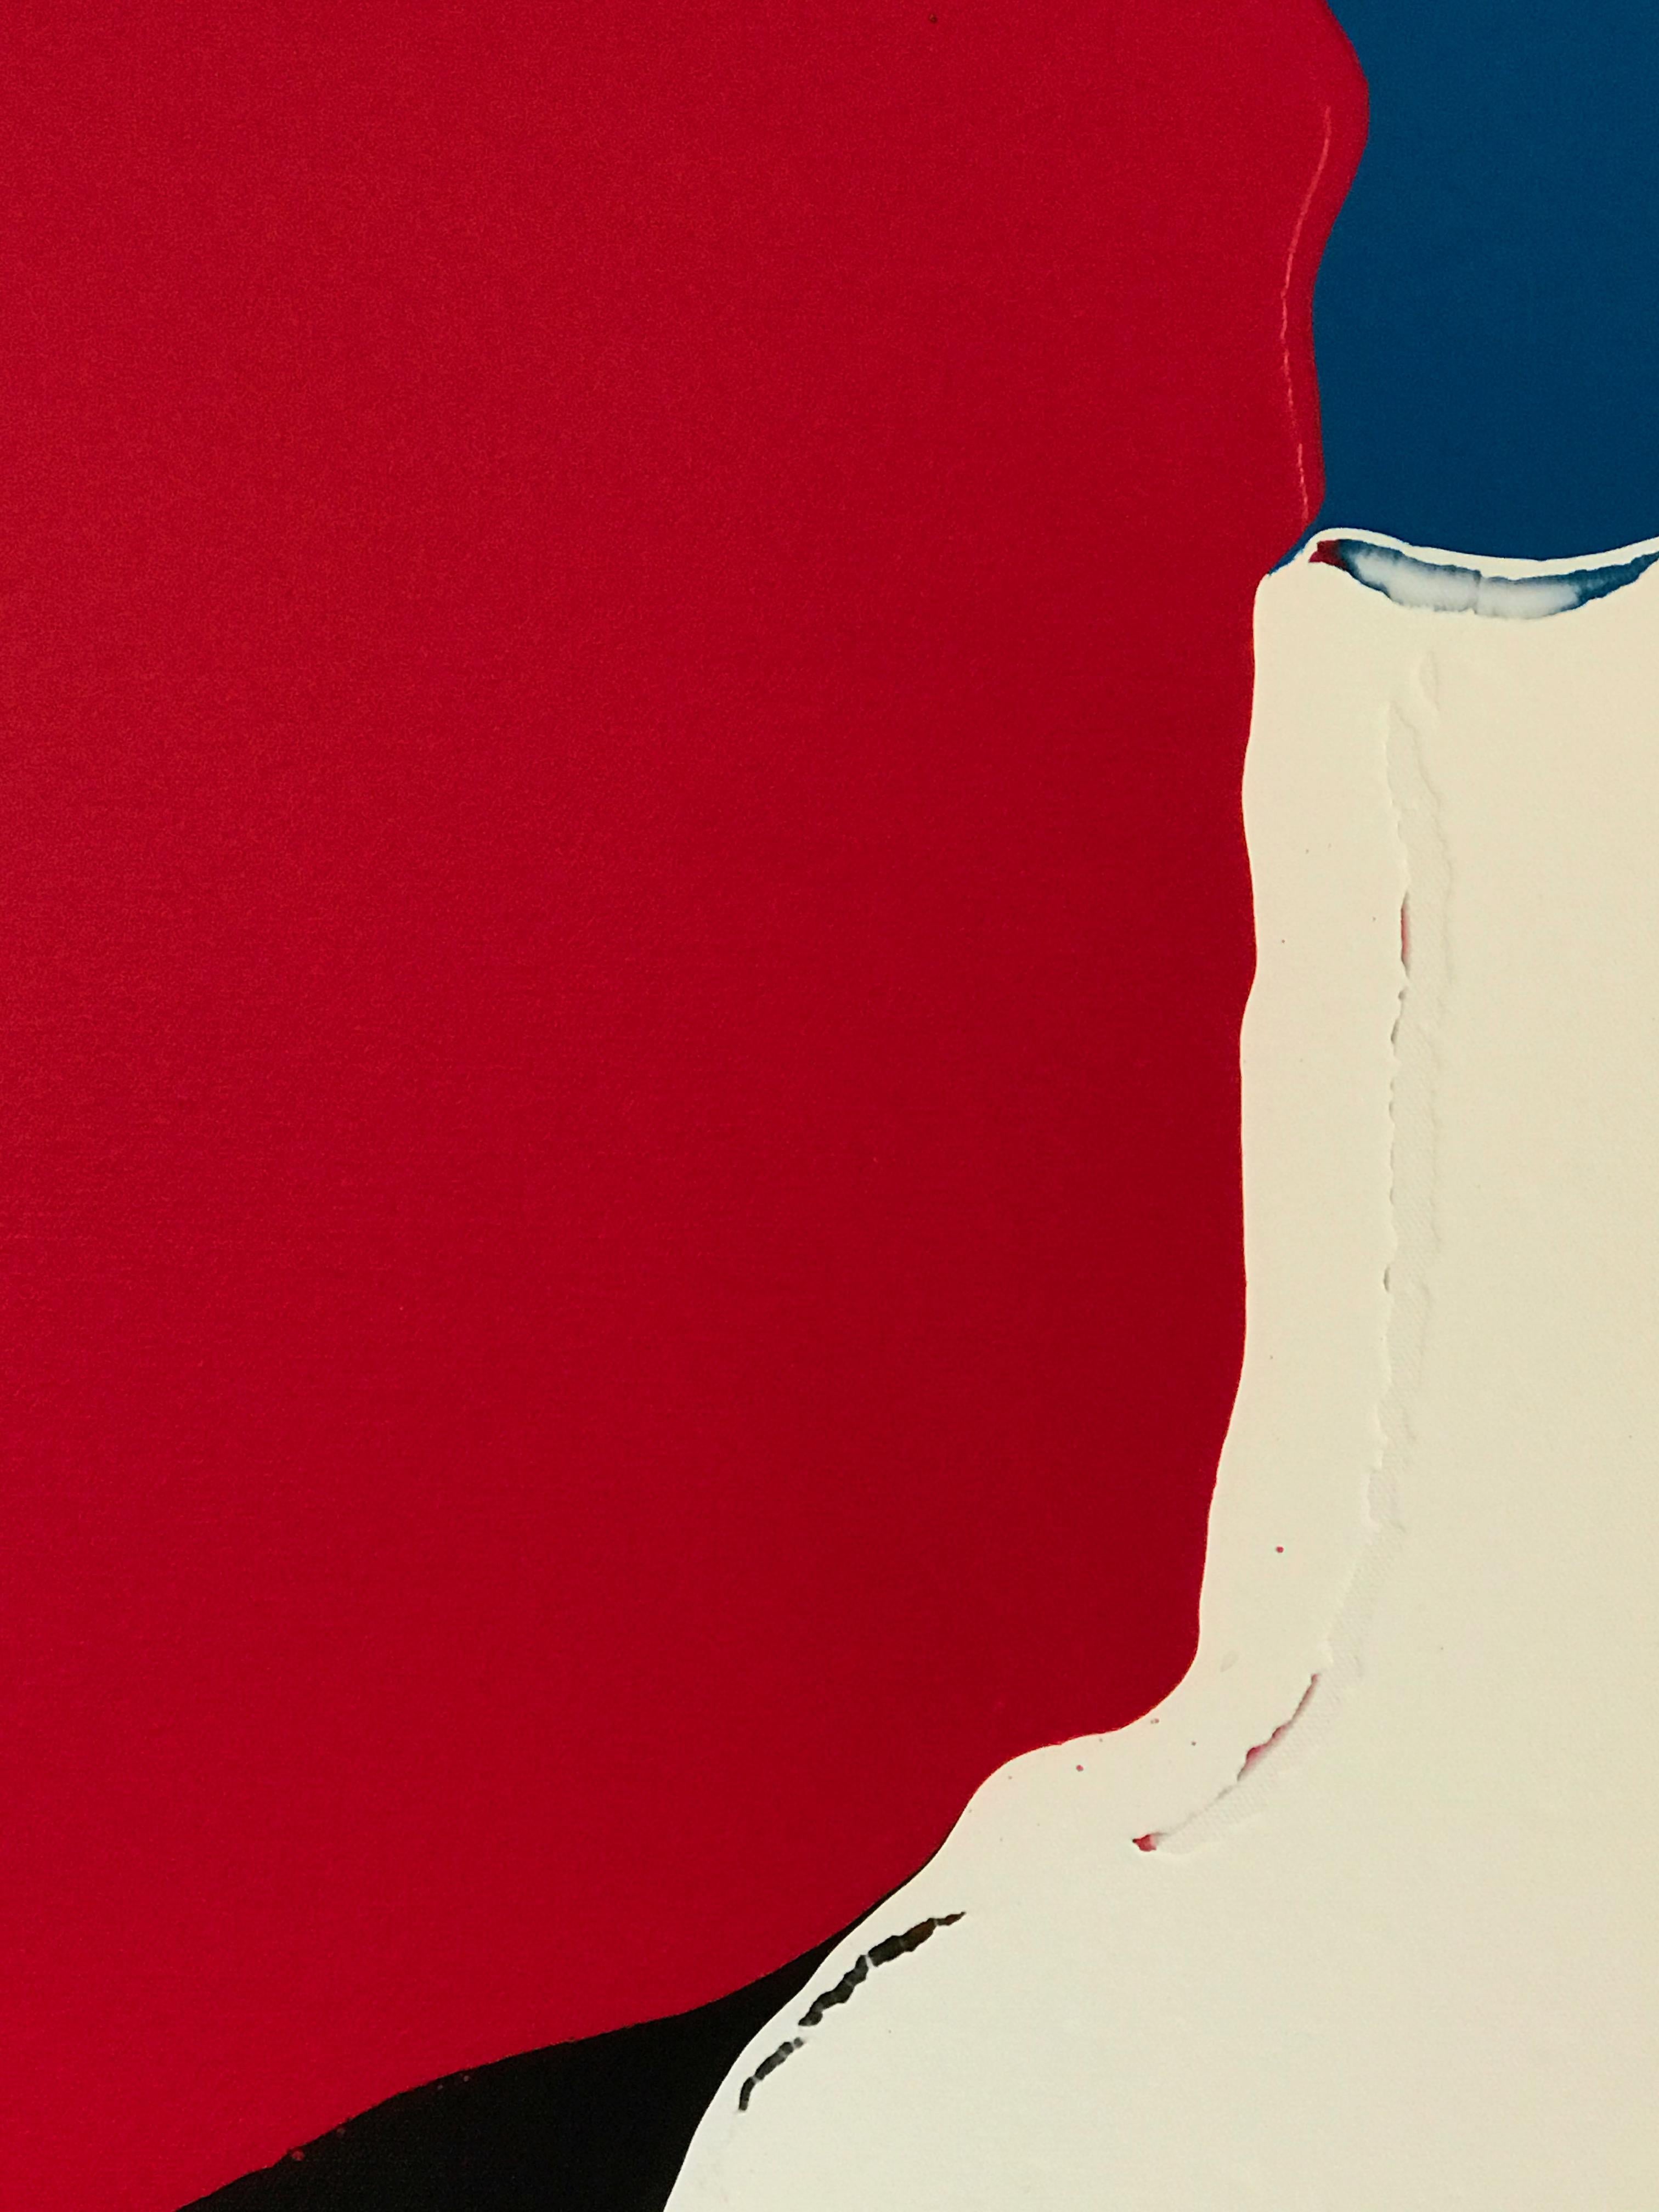 Red Gap, by Glenn Green, Abstract, painting, red, white, blue, vertical, bold - Painting by Glenn A. Green